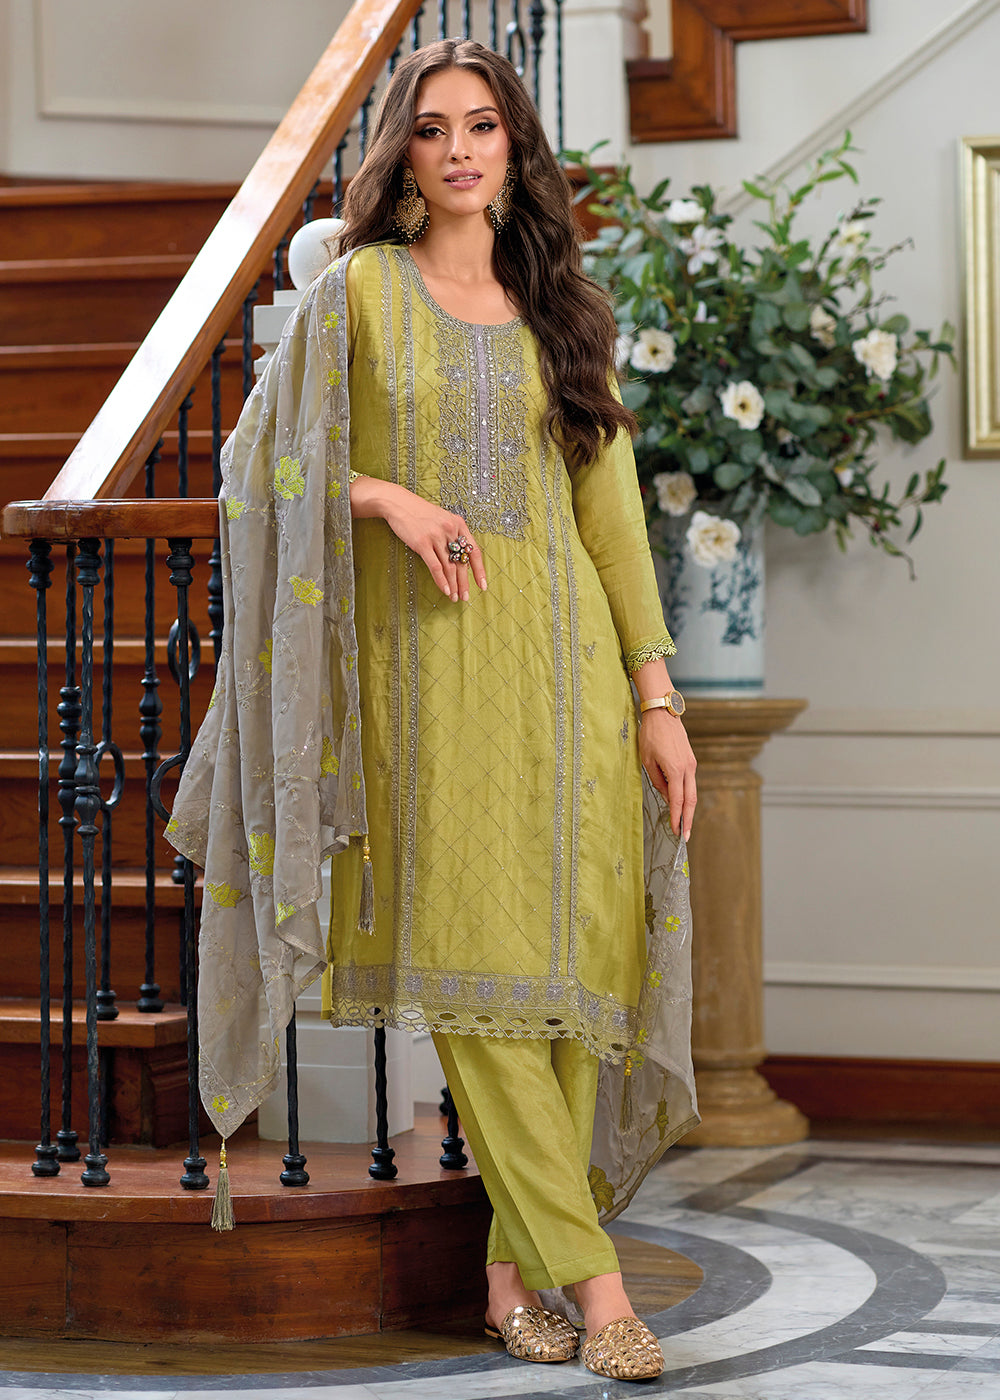 Buy Now Festive Organza Green Embroidered Salwar Kameez Online in USA, UK, Canada, Germany, Australia & Worldwide at Empress Clothing.